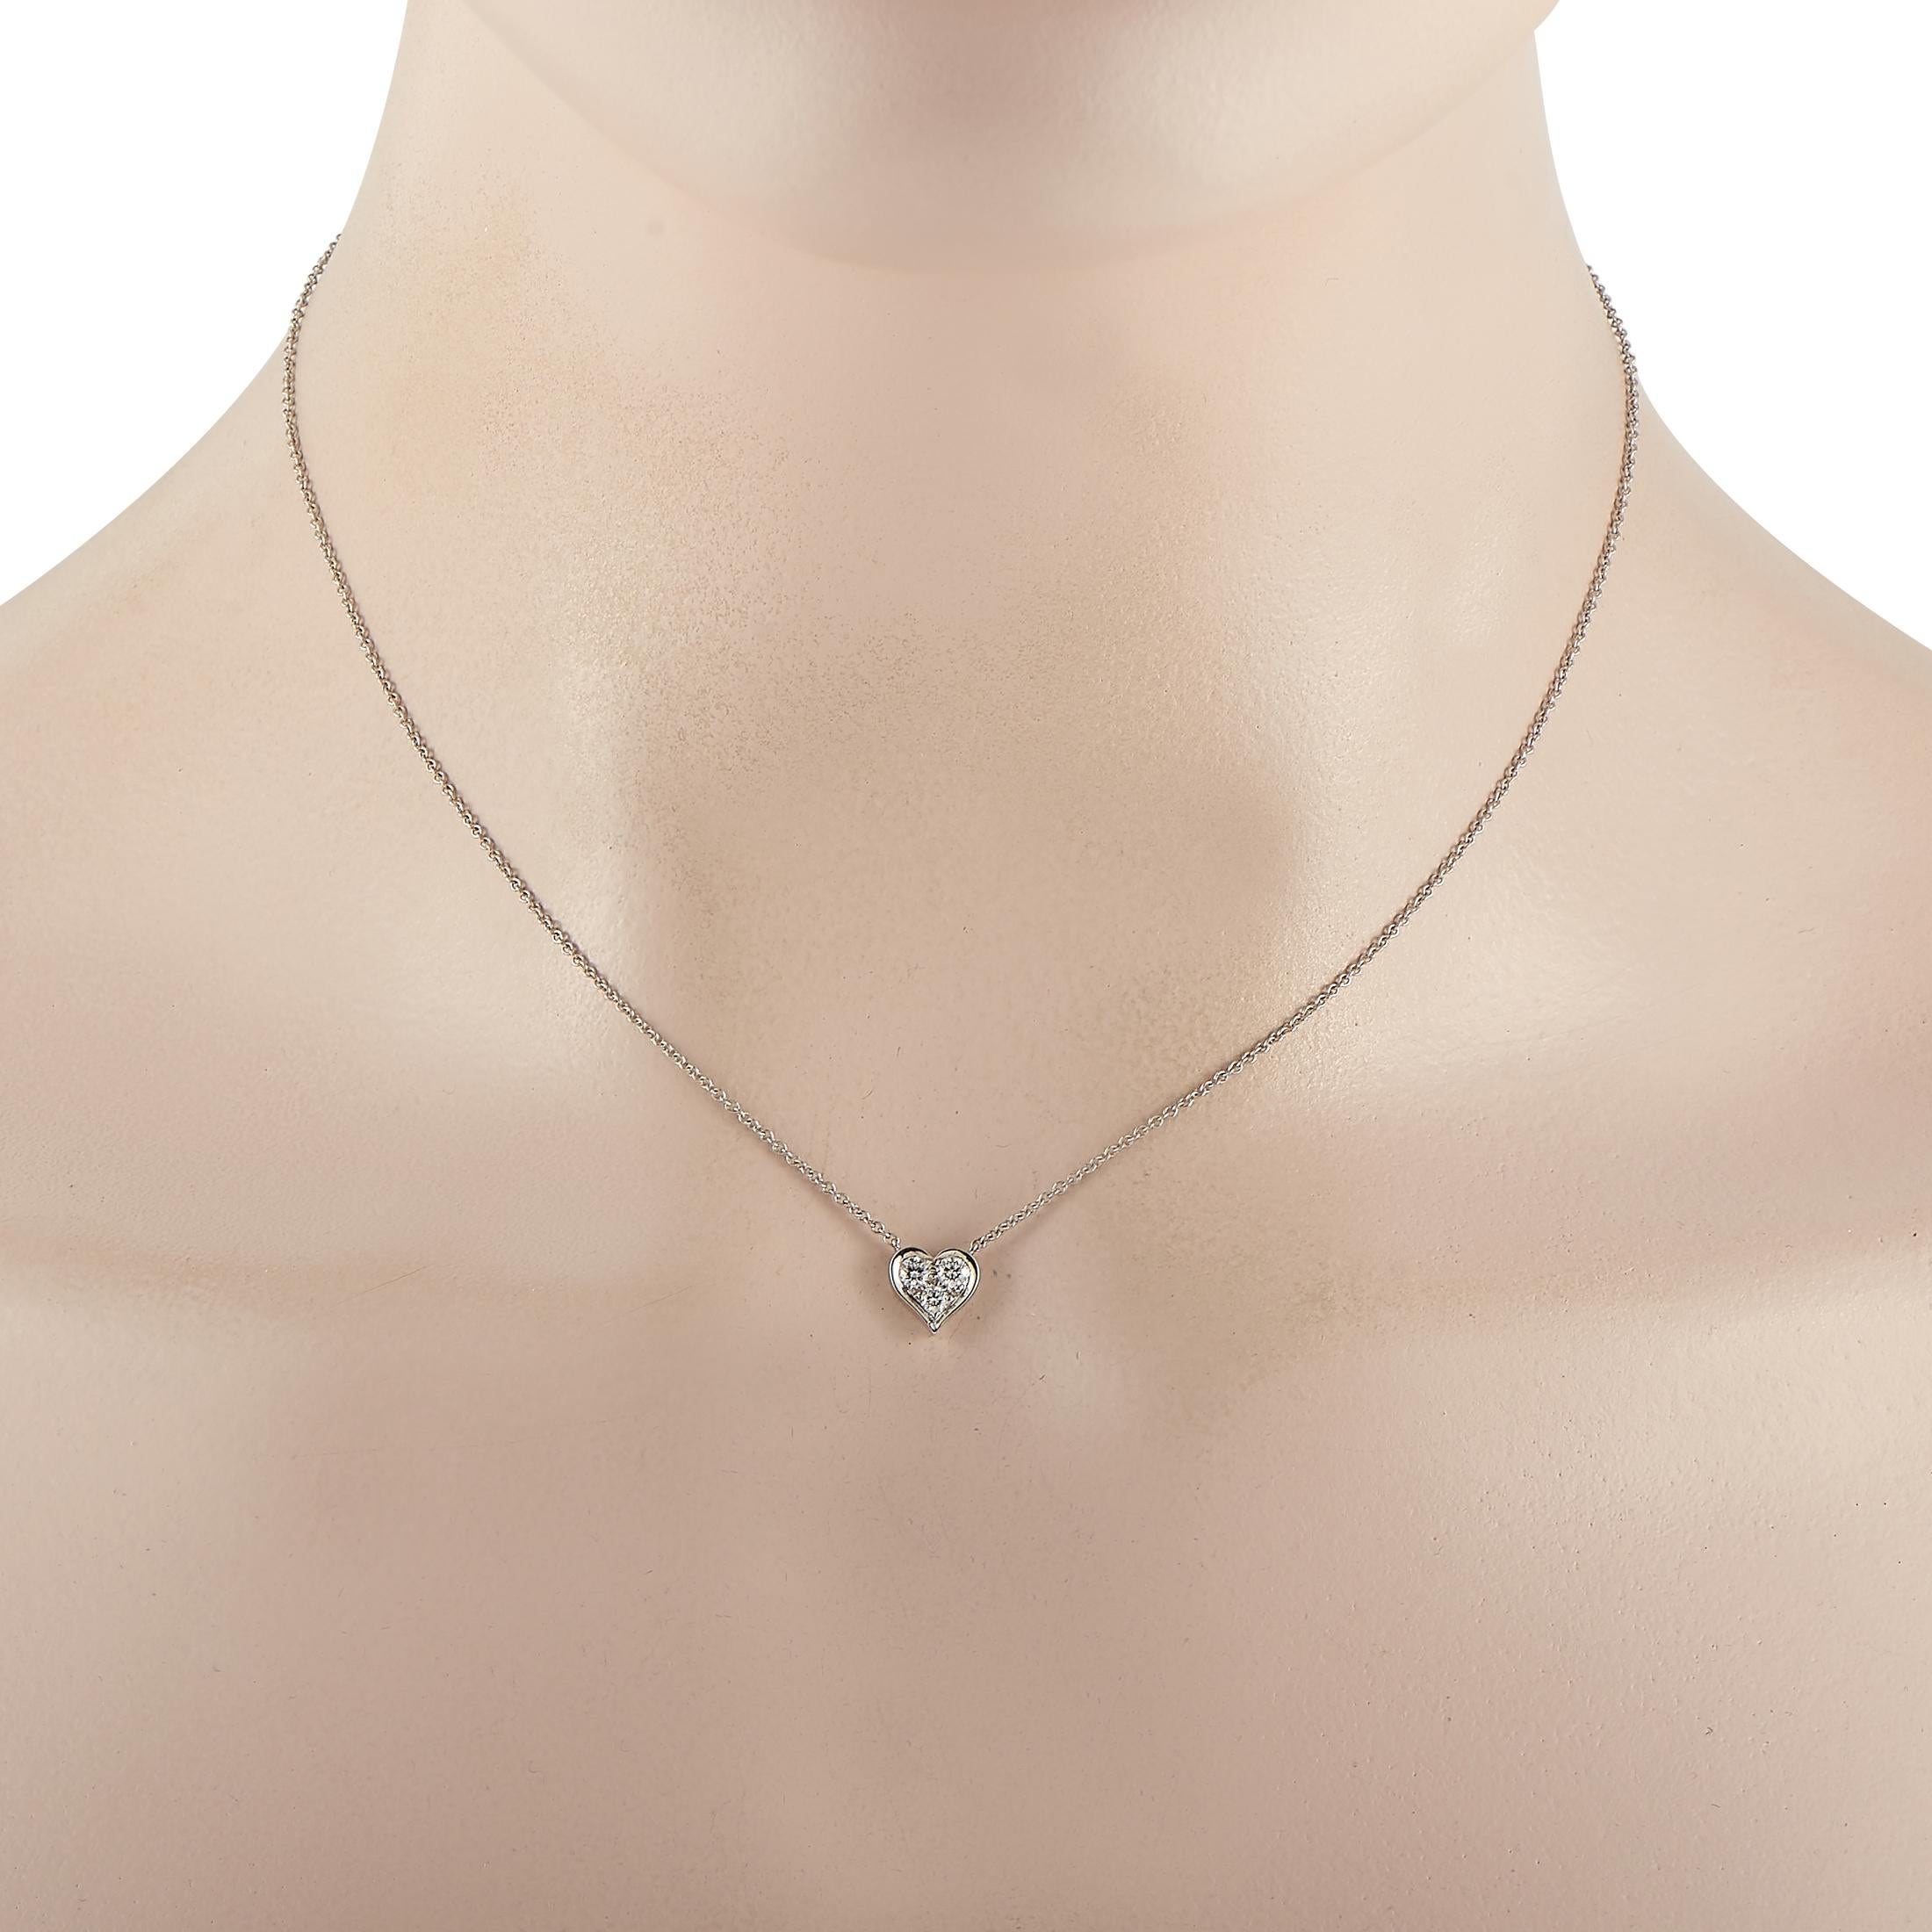 Give your outfits a classy and polished finish with this lovely little jewel. The Tiffany & Co. Platinum 0.17 ct Diamond Heart Necklace features a feminine style with its tiny heart pendant dotted with a cluster of diamonds. A spring ring clasp